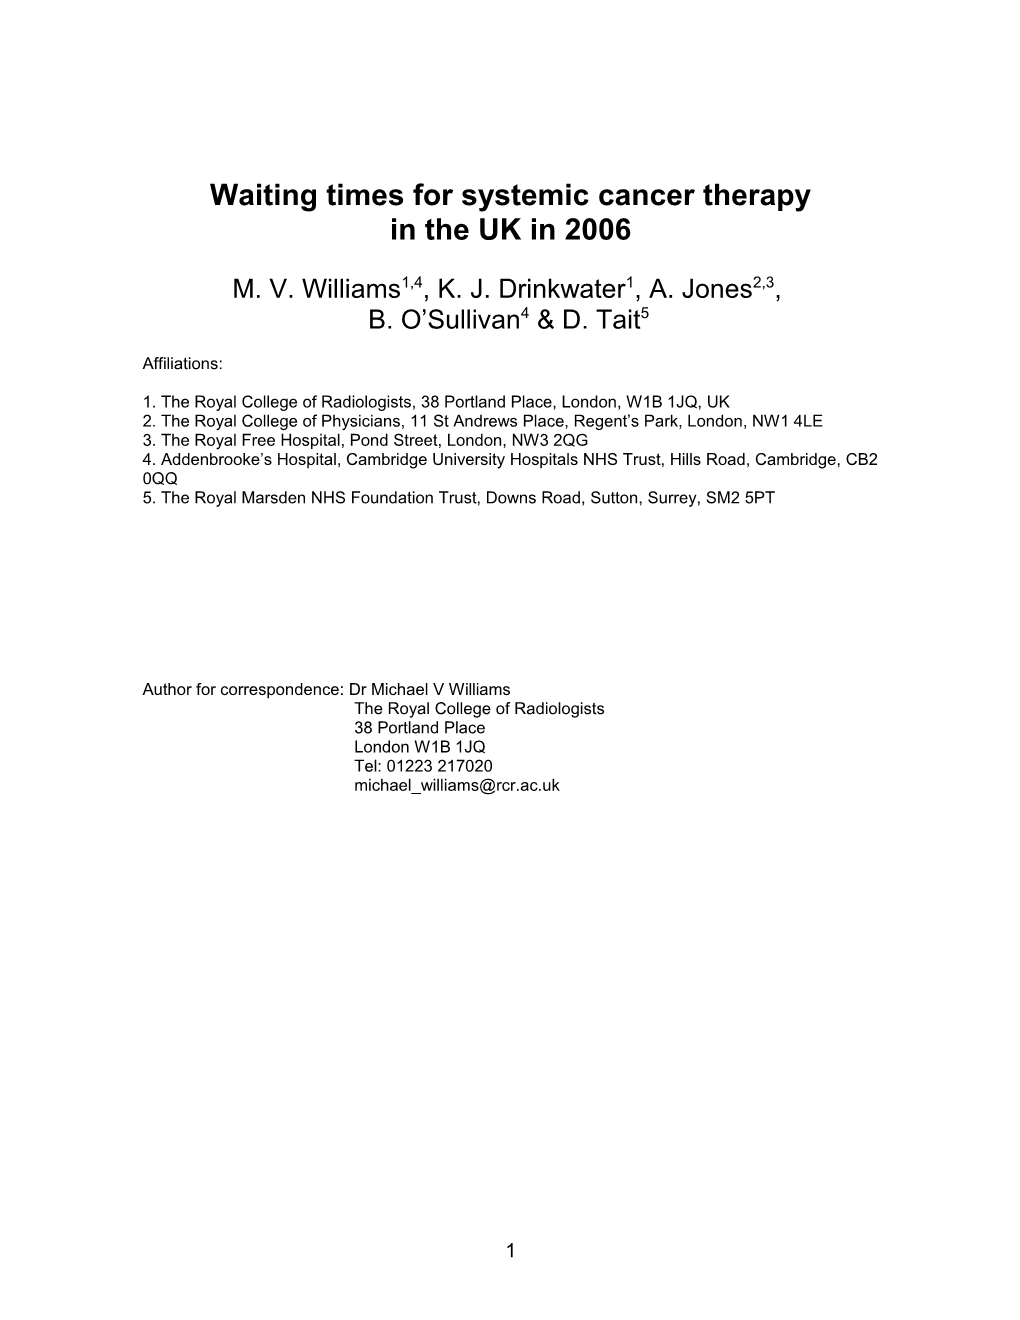 Waiting Times for Systemic Cancer Therapy in the UK in 2006